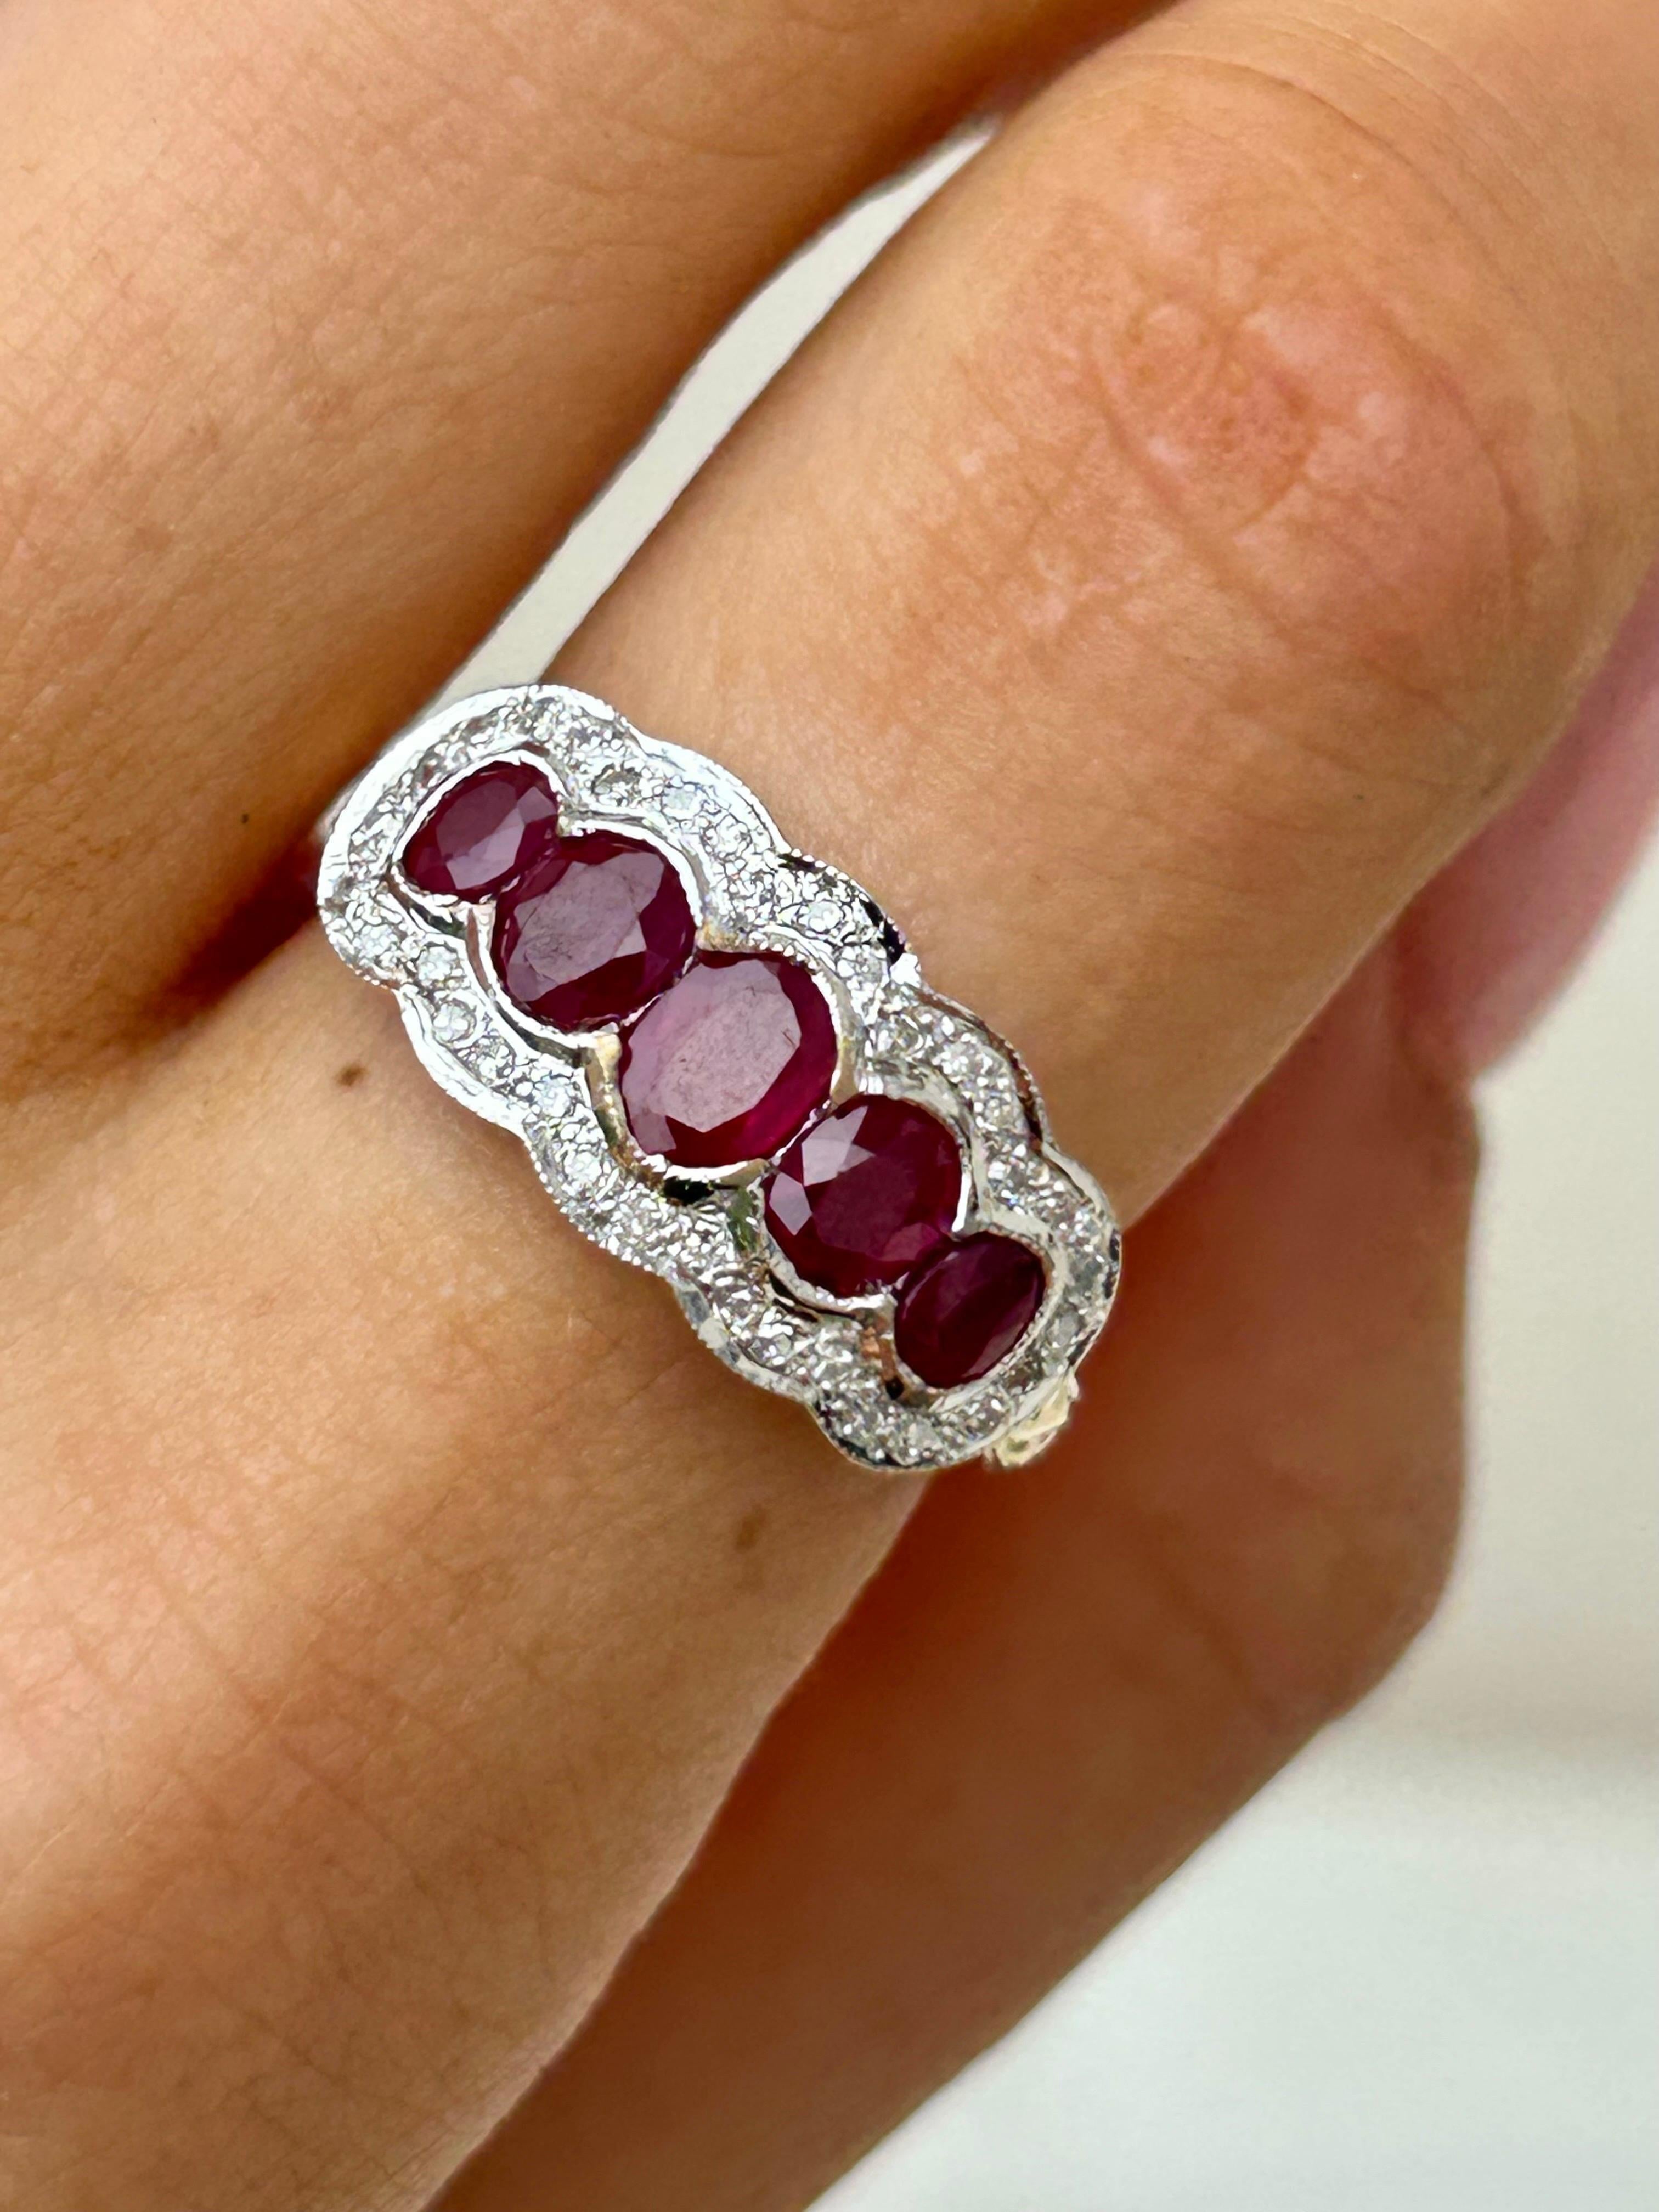 Chunky 18ct Yellow Gold Ruby and Diamond 5 Stone Ring 

most incredible chunky ruby stones with diamonds surrounding, truly excellent! 

The item comes without the box in the photos but will be presented in an Howard’s Antique gift box
